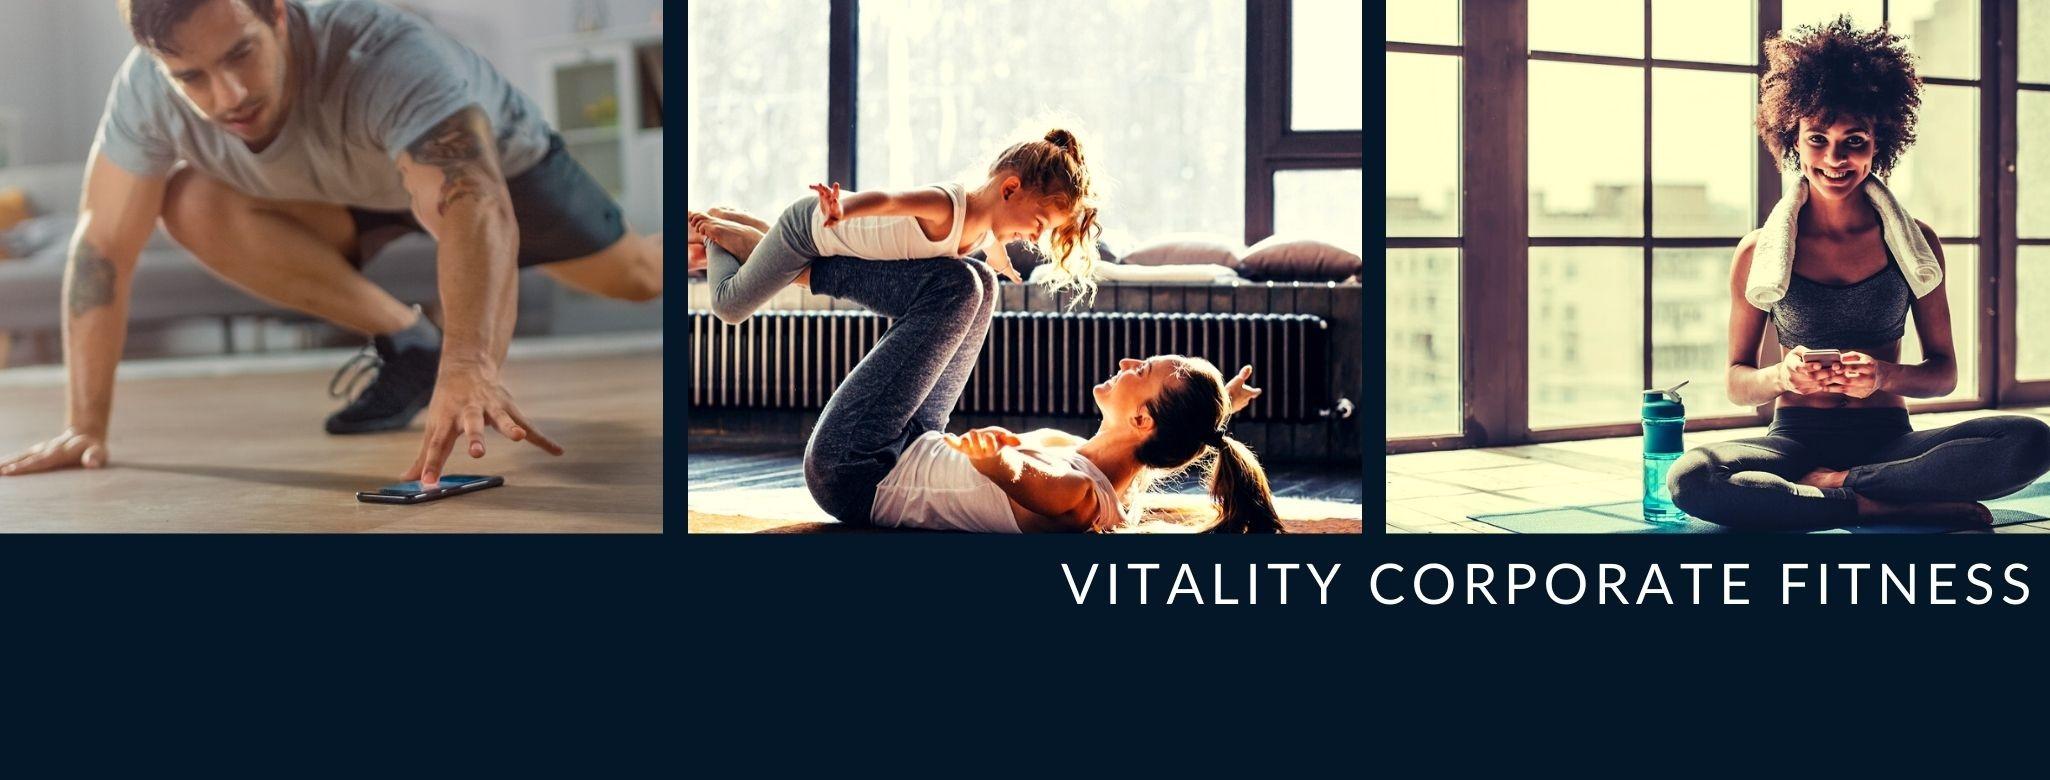 Review Vitality Corporate Fitness: Personalized Trainign from Anywhere - Appvizer